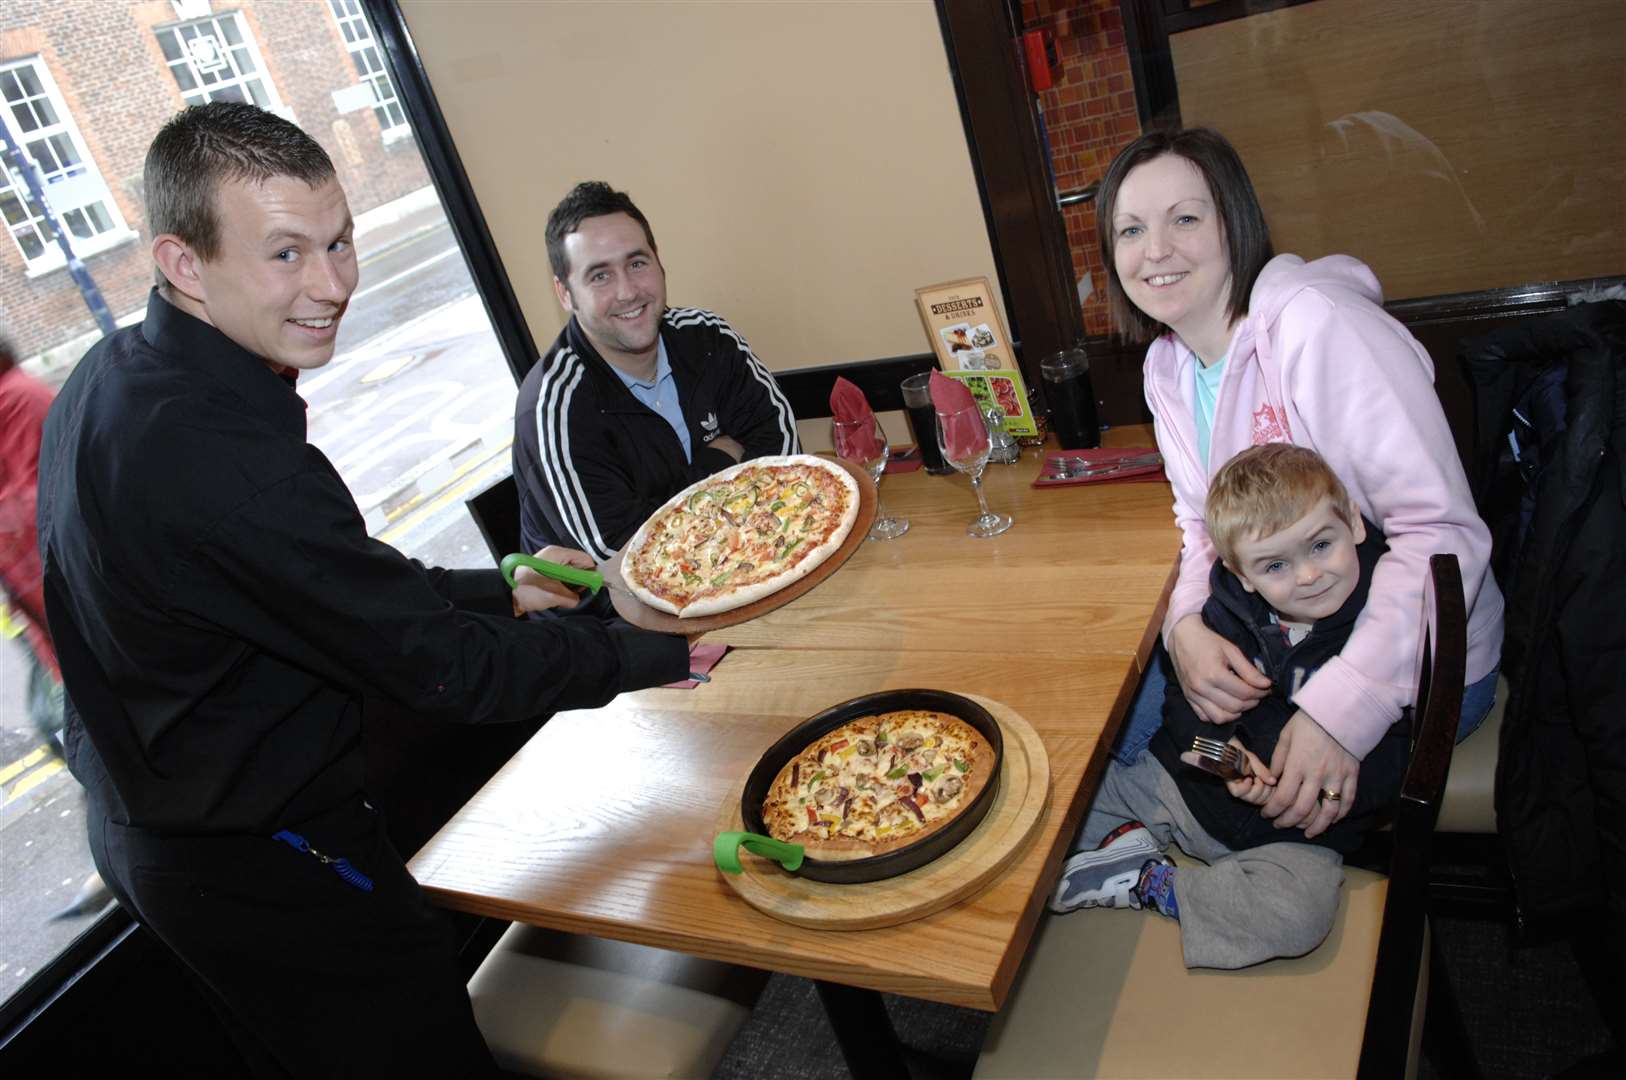 Customers enjoying a meal at the Pizza Hut in King Street Maidstone, back in 2009